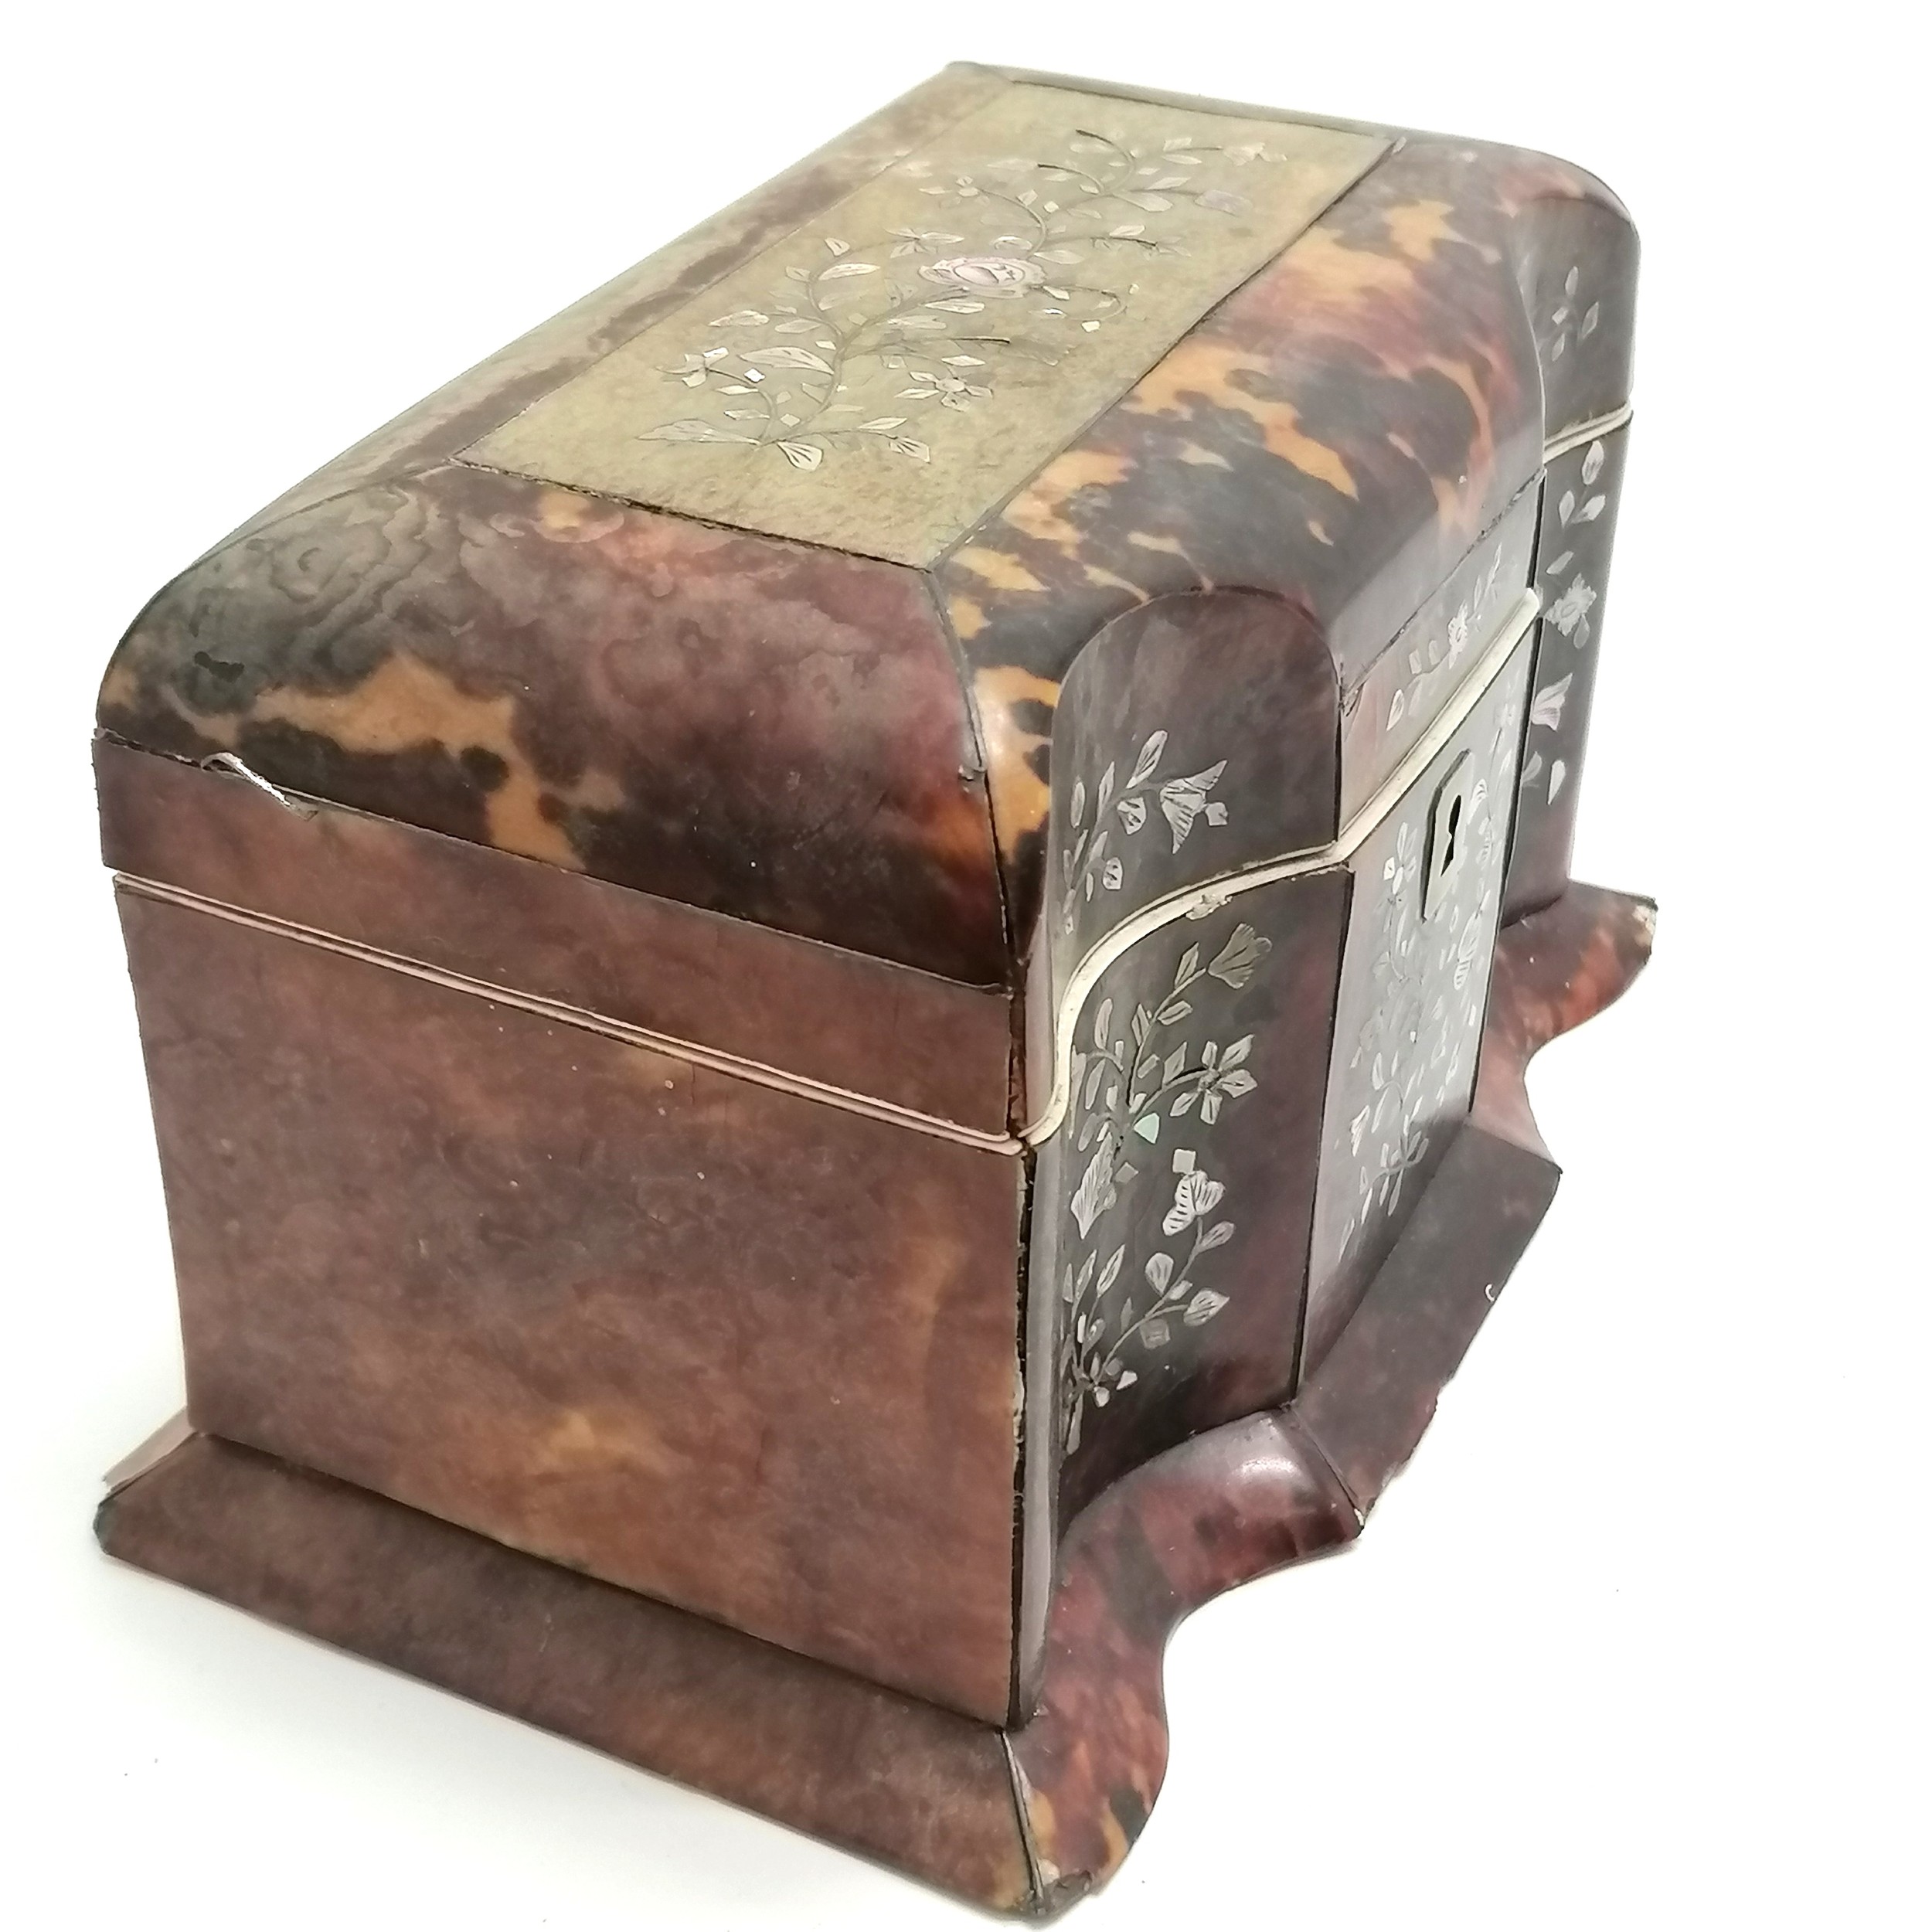 Antique tortoiseshell and mother of pearl tea caddy for restoration 20cm x 12cm x 12cm high - Image 6 of 8